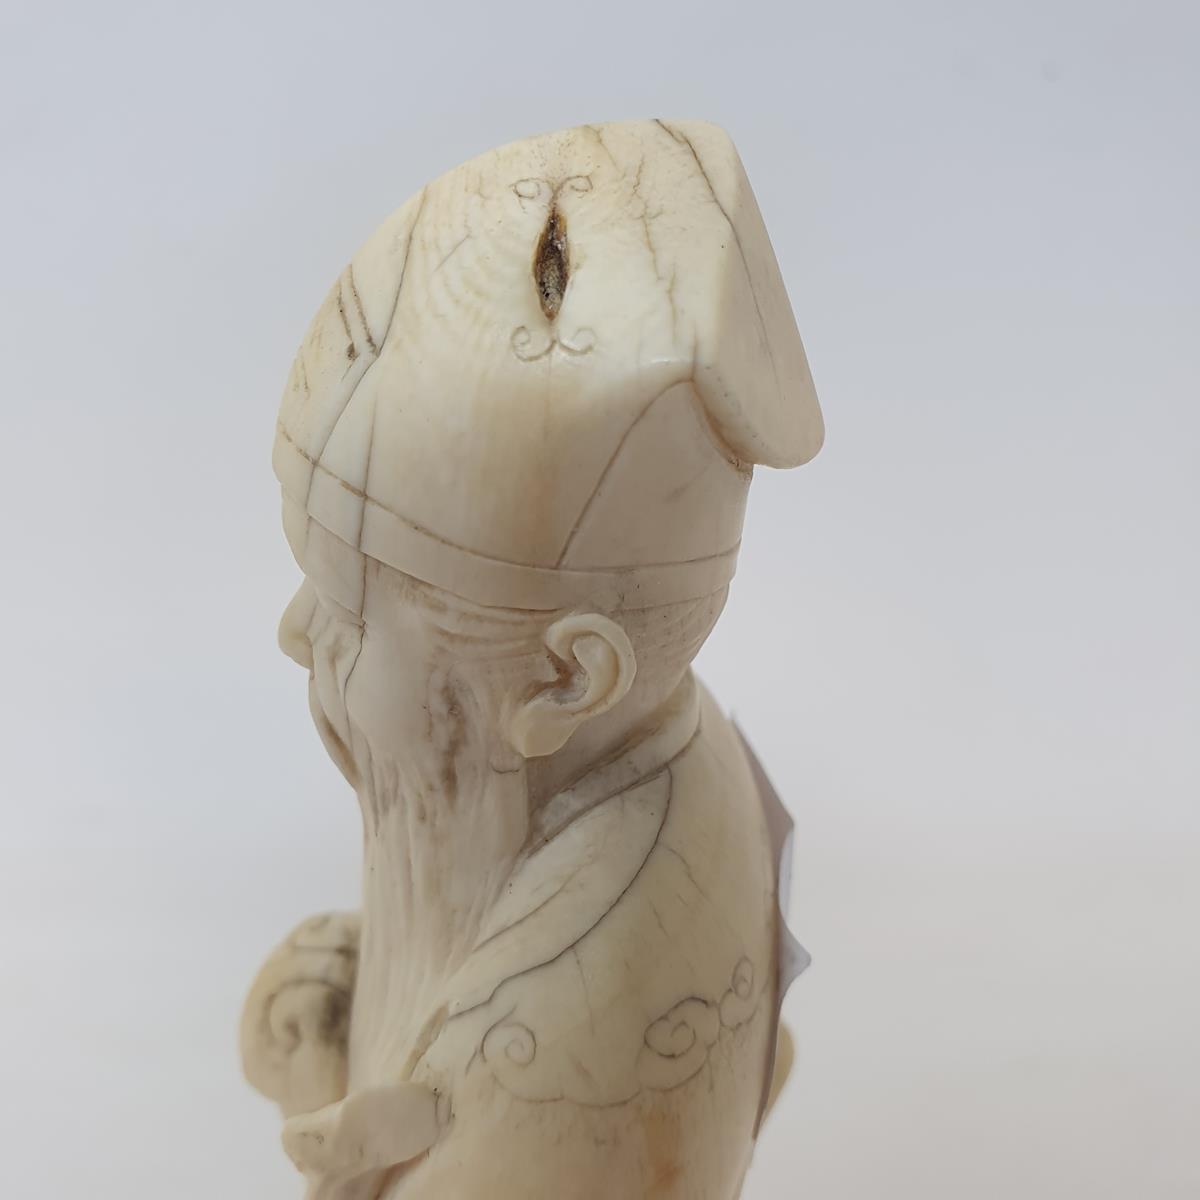 An early 20th century Chinese carved ivory figure, of a sage holding a staff, 19 cm high - Image 21 of 21